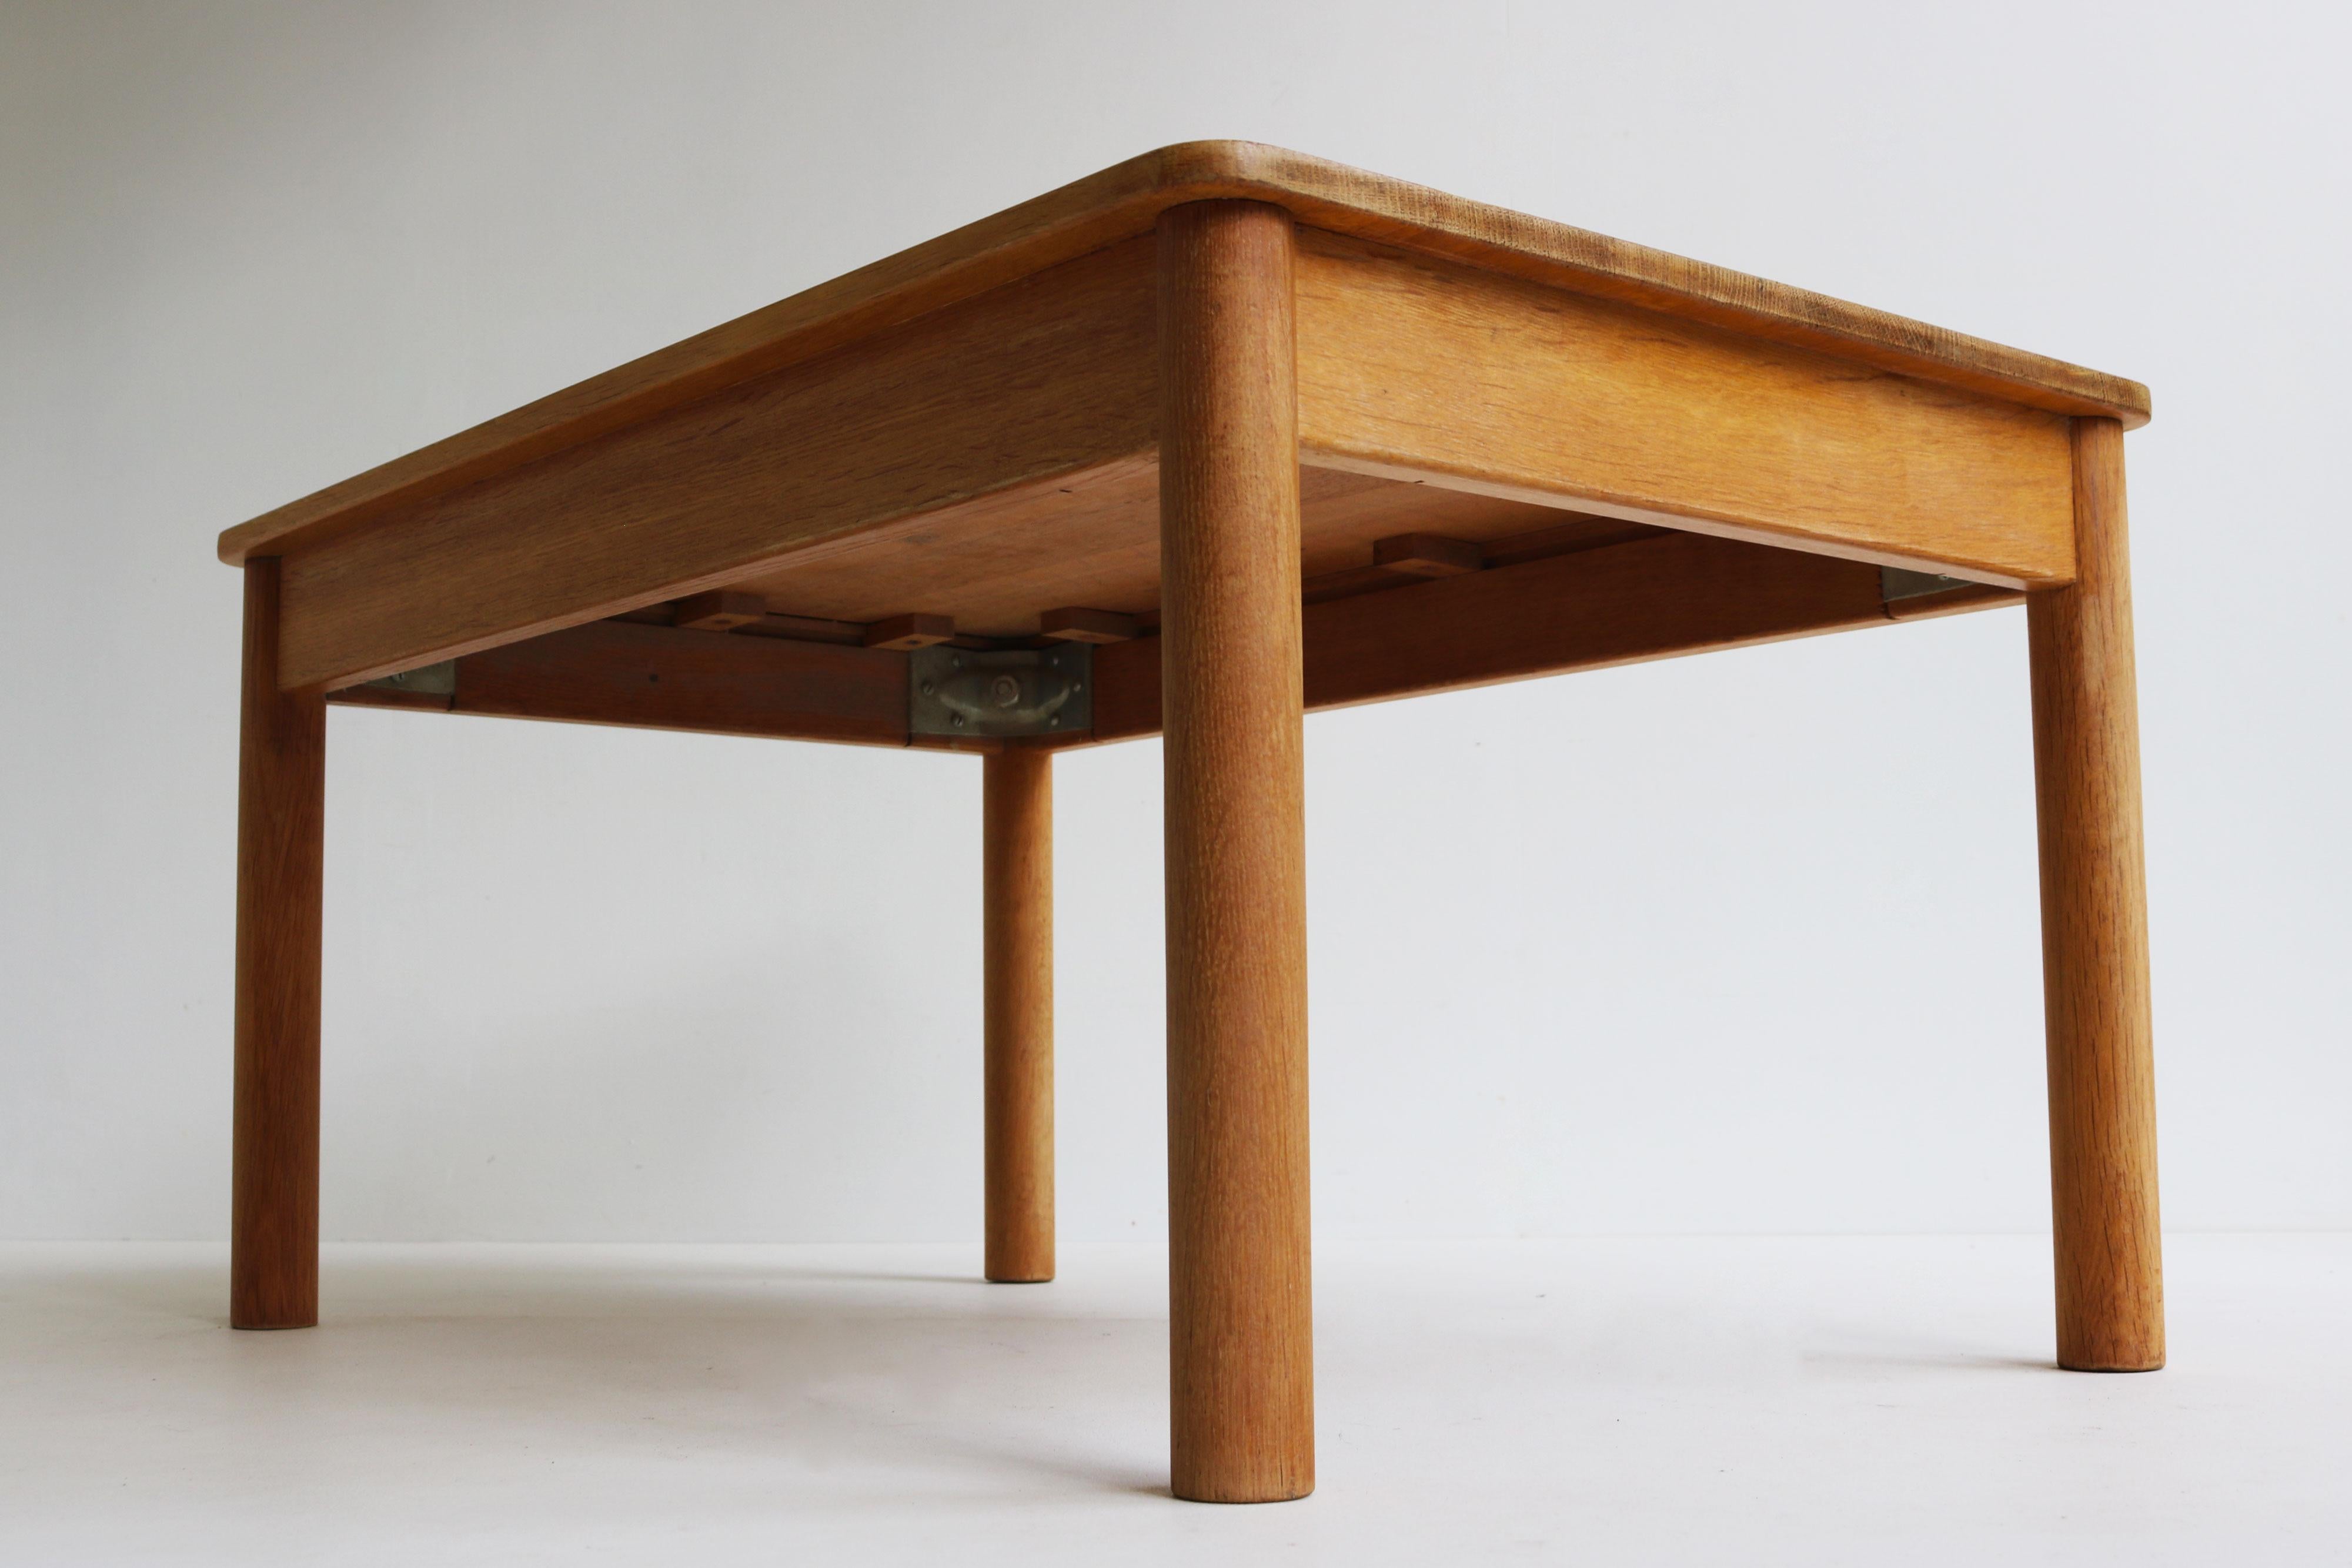 Solid oak coffee table Model: 5350 by Borge Mogensen 1950 Shaker syle side table For Sale 3